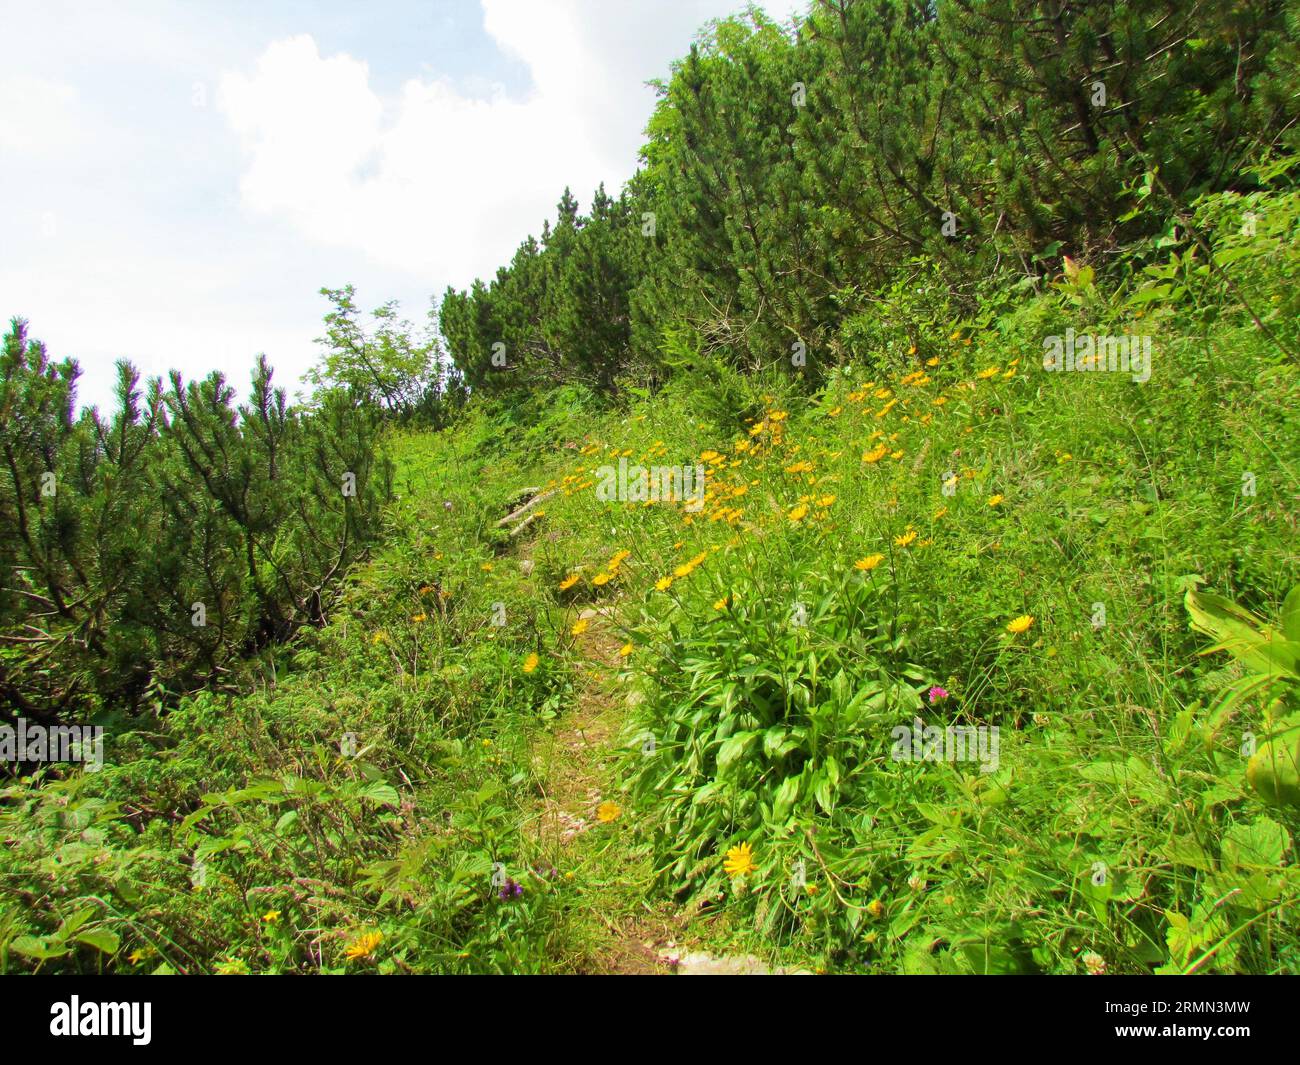 Trail surrounded by a grass covered meadow full of yellow flowering hawkbit (Leontodon pyrenaicus) flowers and a meadow surrounded by creeping pine (P Stock Photo